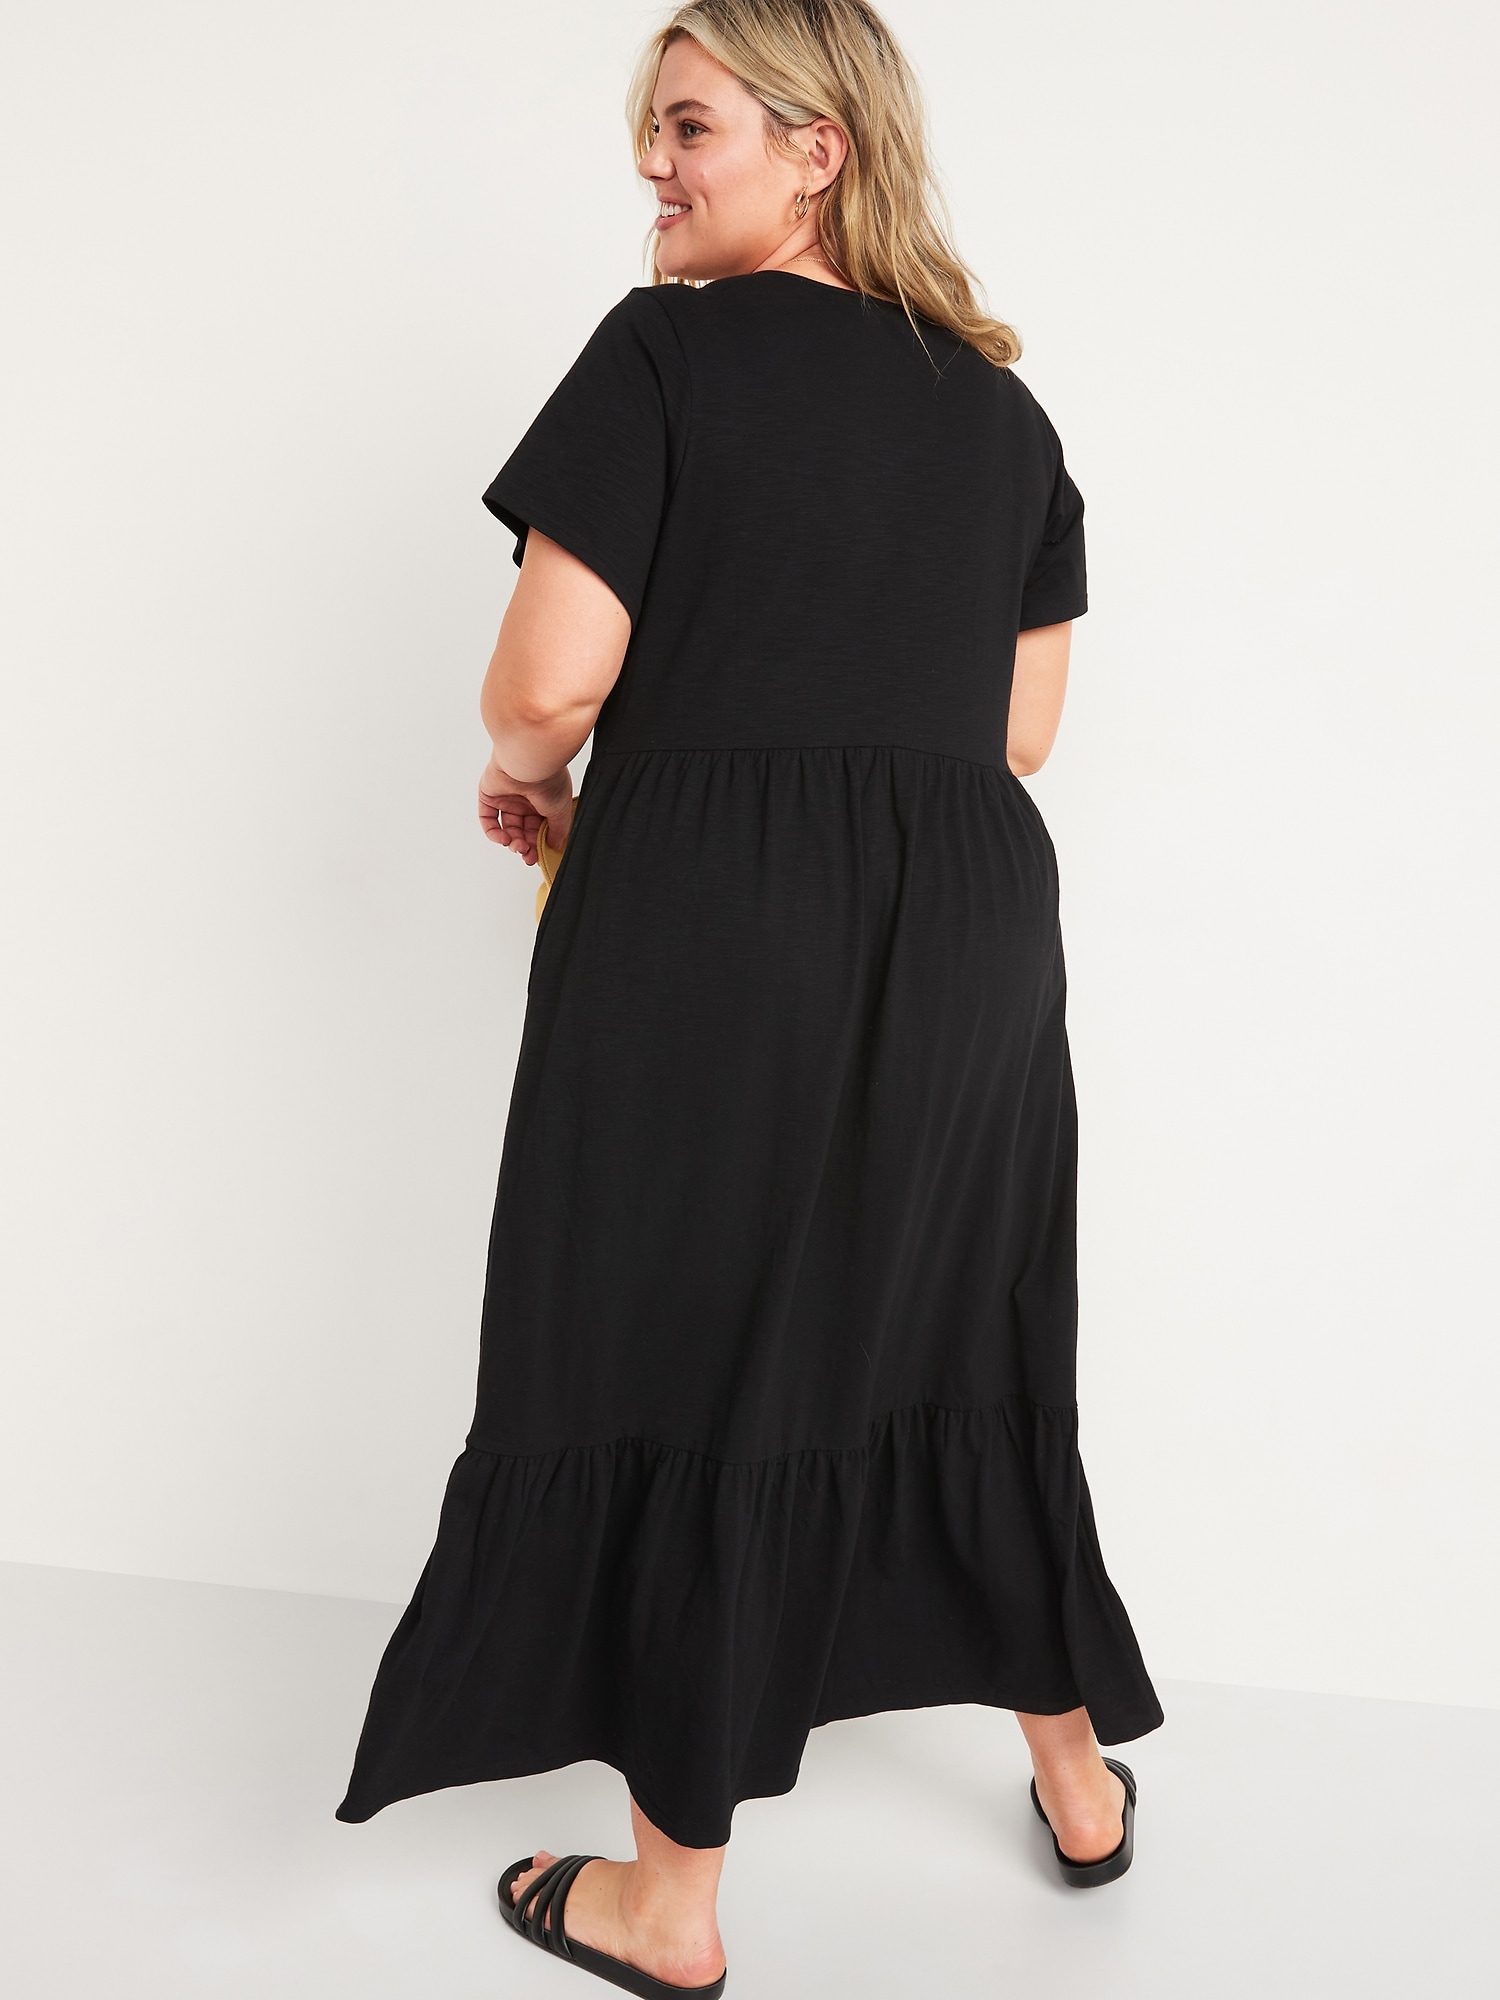 Fit & Flare Plus-Size Tiered Maxi Dress, Old Navy